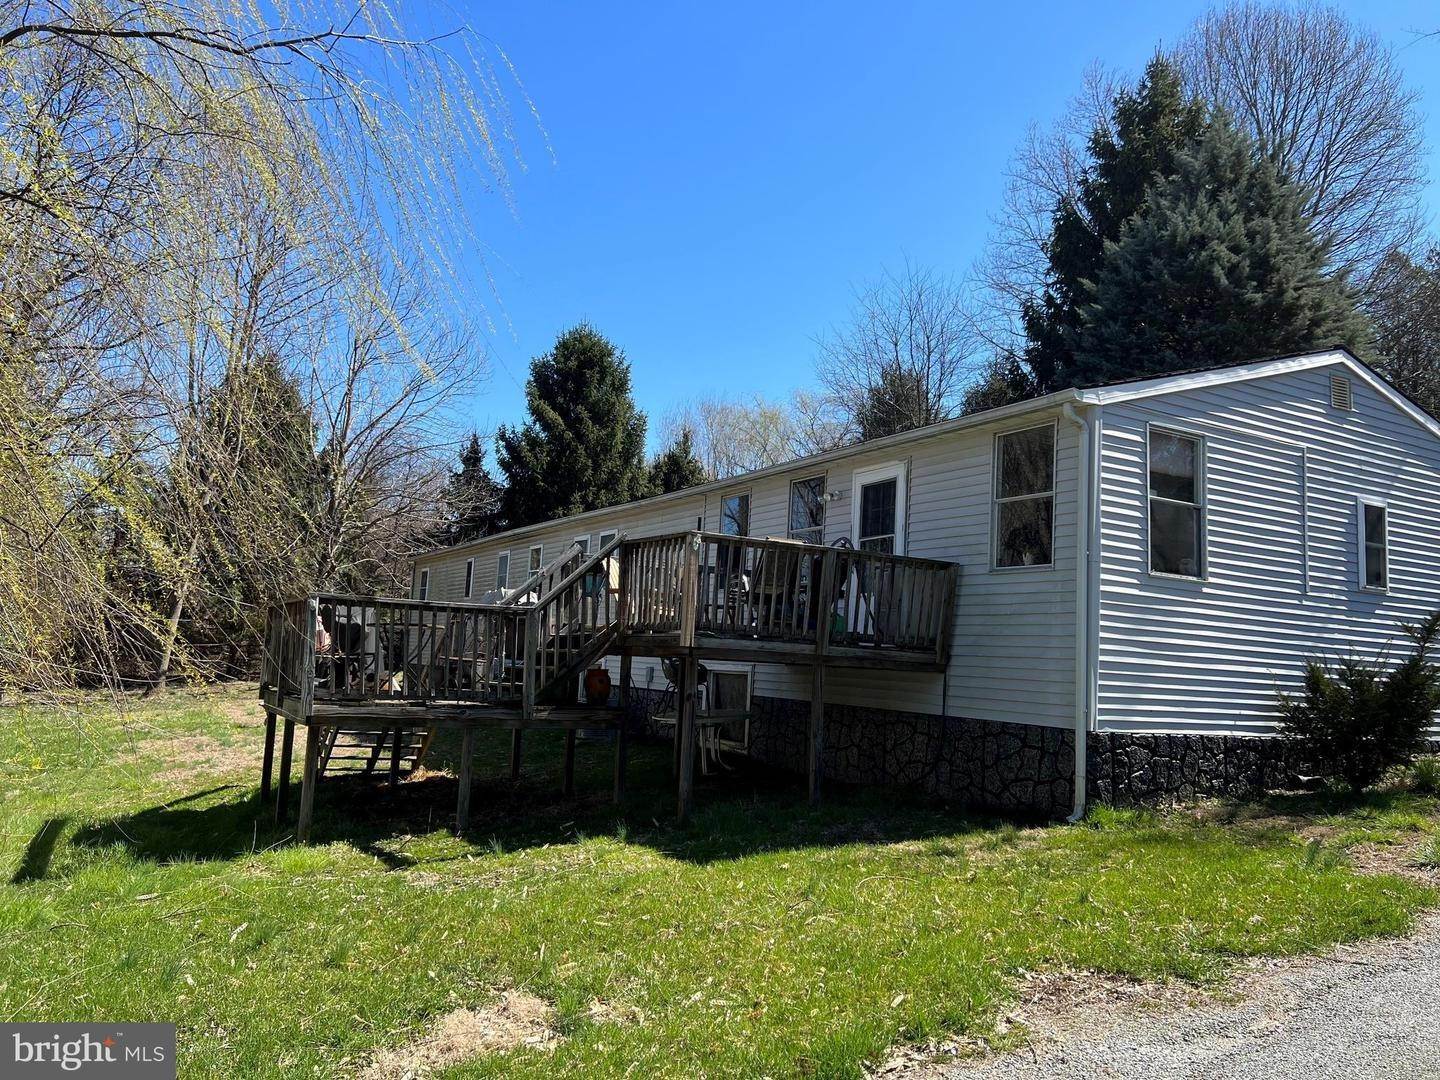 9. Multi Family for Sale at 121 HOUSE ROCK Road Pequea, Pennsylvania 17565 United States